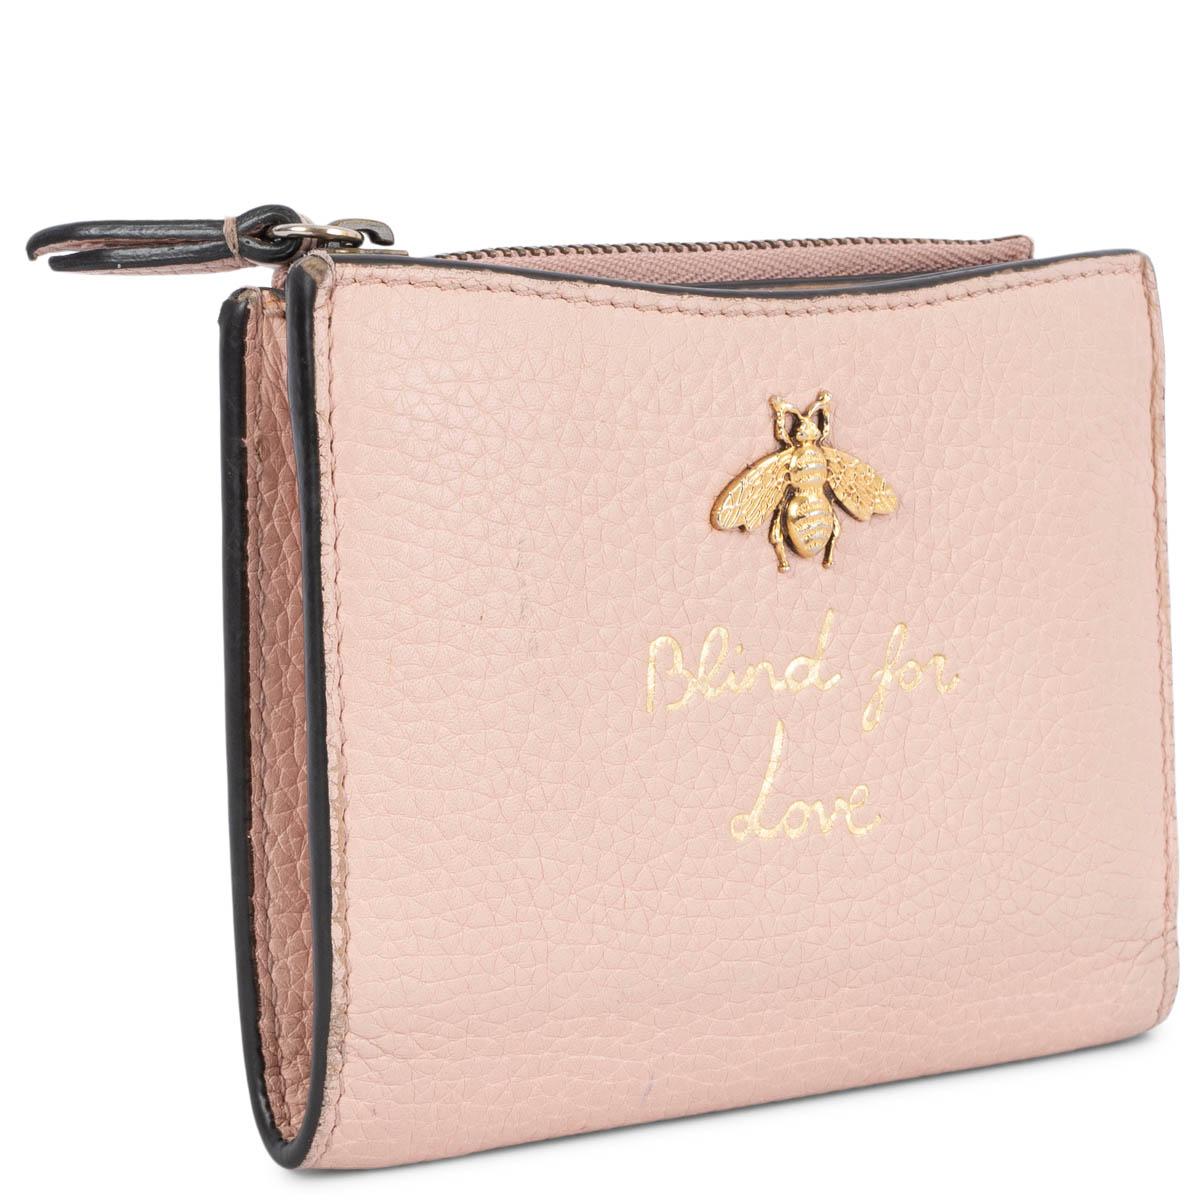 100% authentic Gucci Blind for Love small wallet in pebbled nude calfskin featuring gold-tone hardware. Opens with a push-button to six credit card slots, a bill compartment and five other small compartments plus a zipped coin pocket. The design